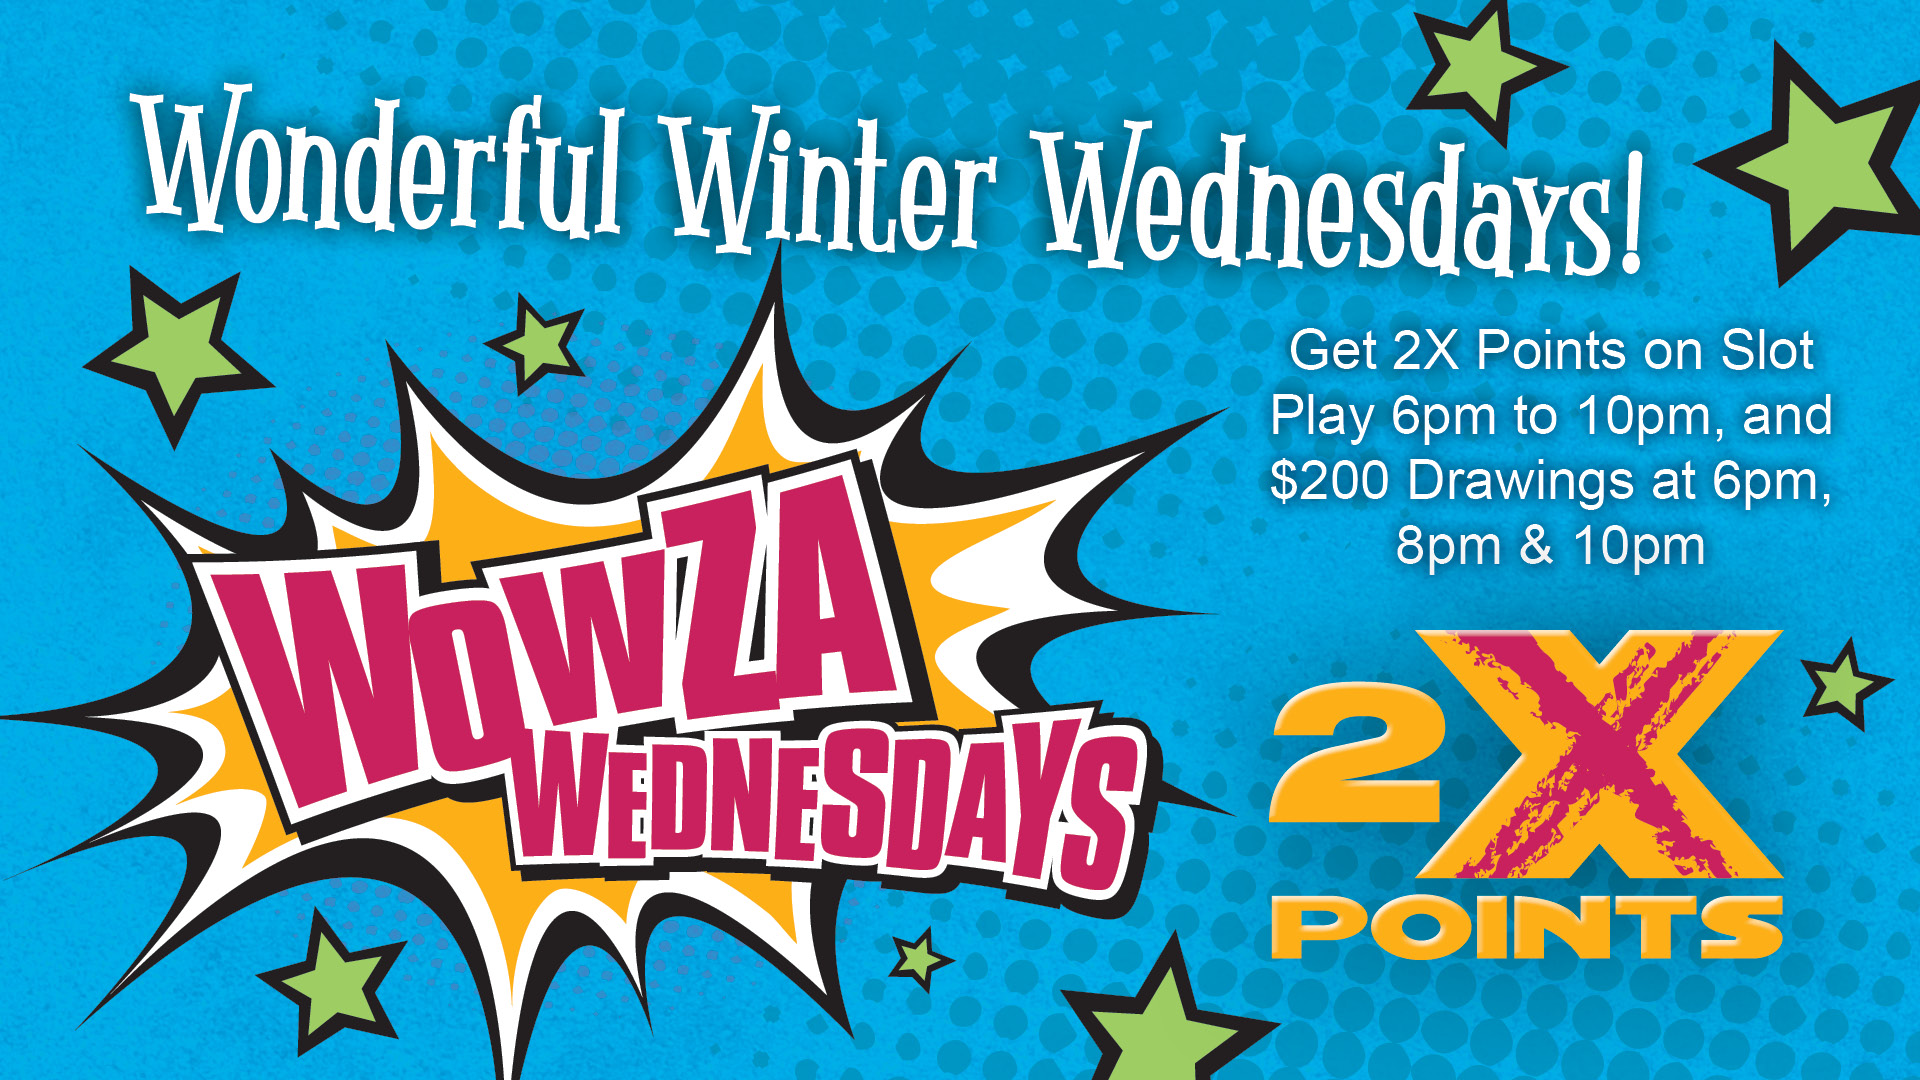 Wowza Wednesdays: Wonderful Winter Wednesdays! Get 2X Points on slot play 6pm to 10pm, and $200 Drawings at 6pm, 8pm, & 10pm